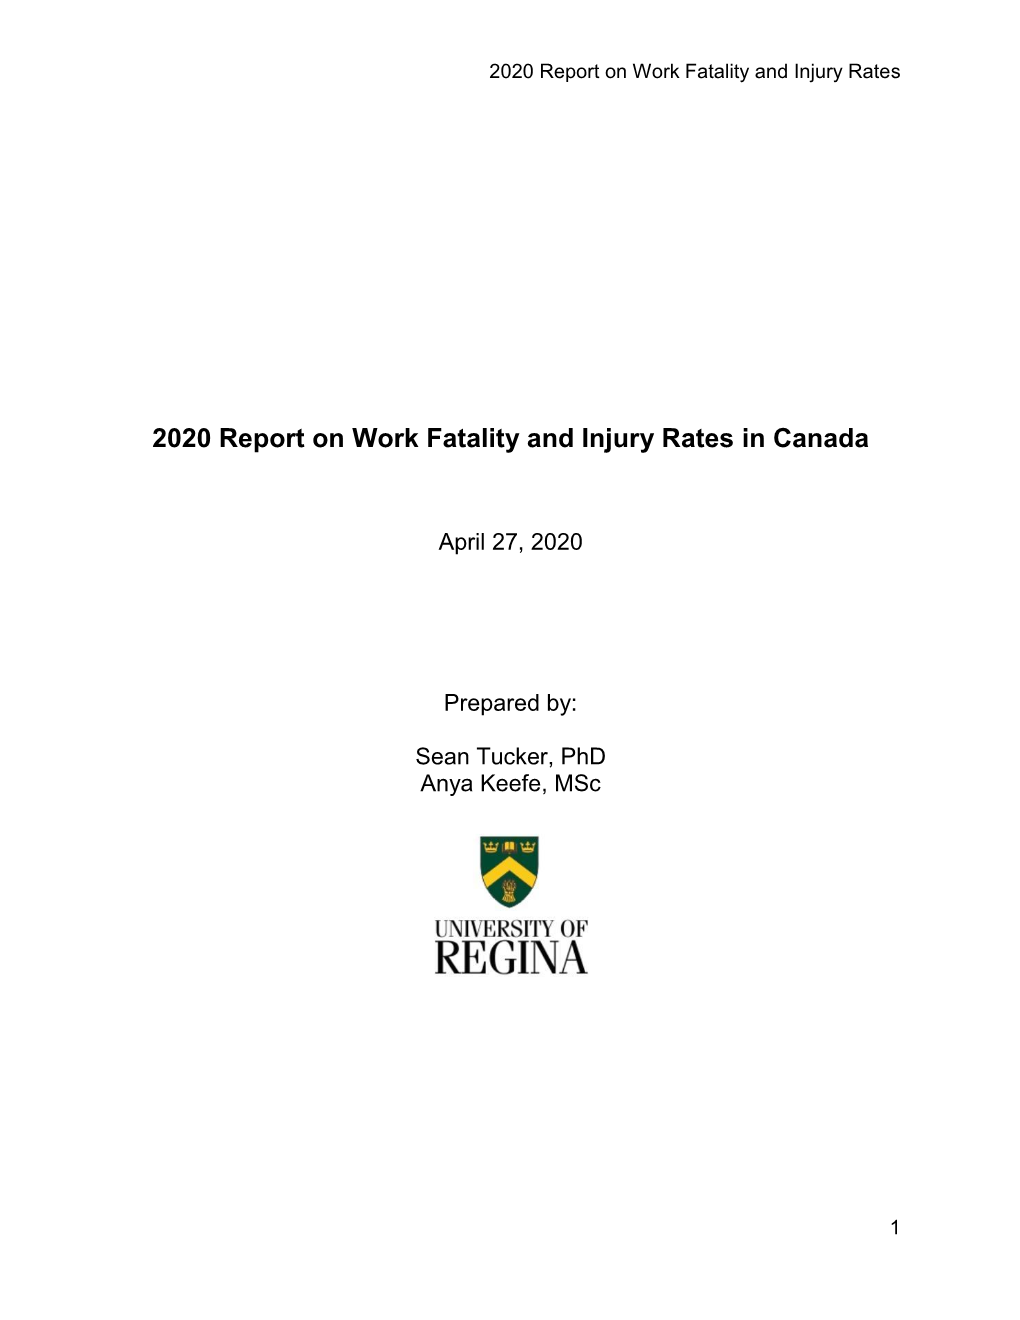 2020 Report on Work Fatality and Injury Rates in Canada